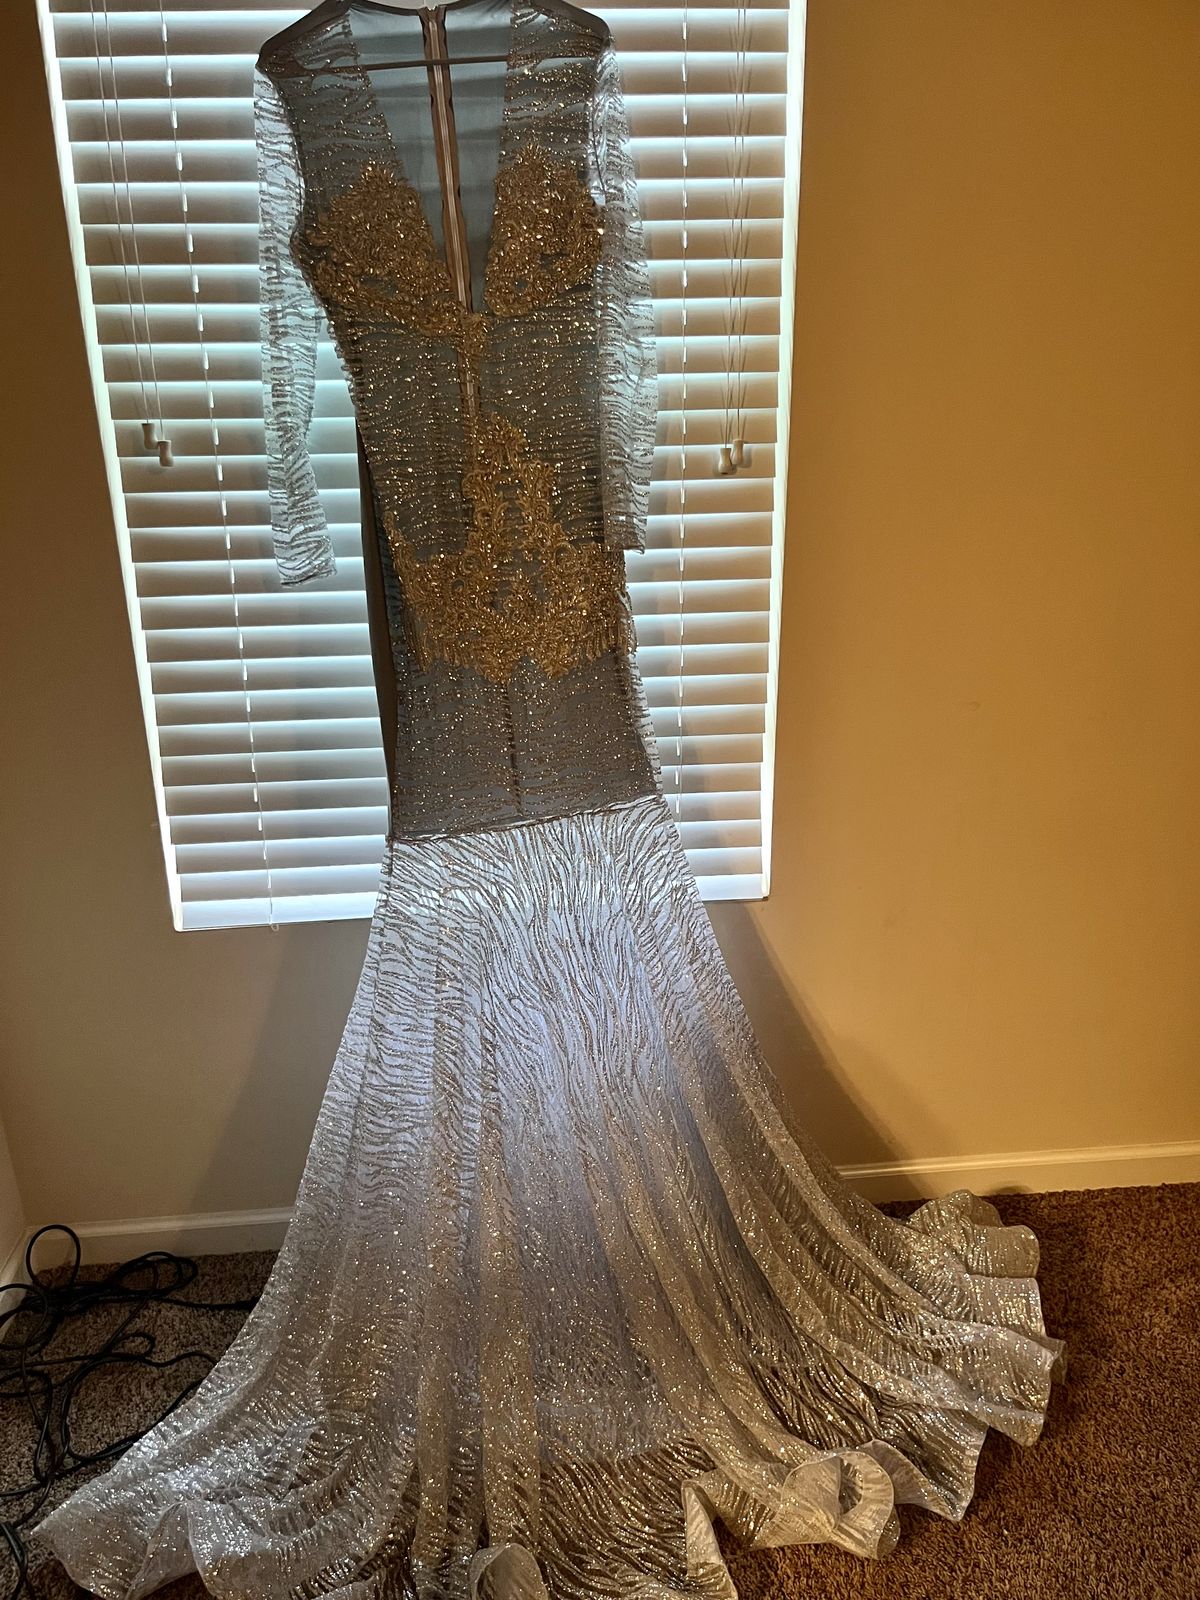 Size 8 Silver Mermaid Dress on Queenly